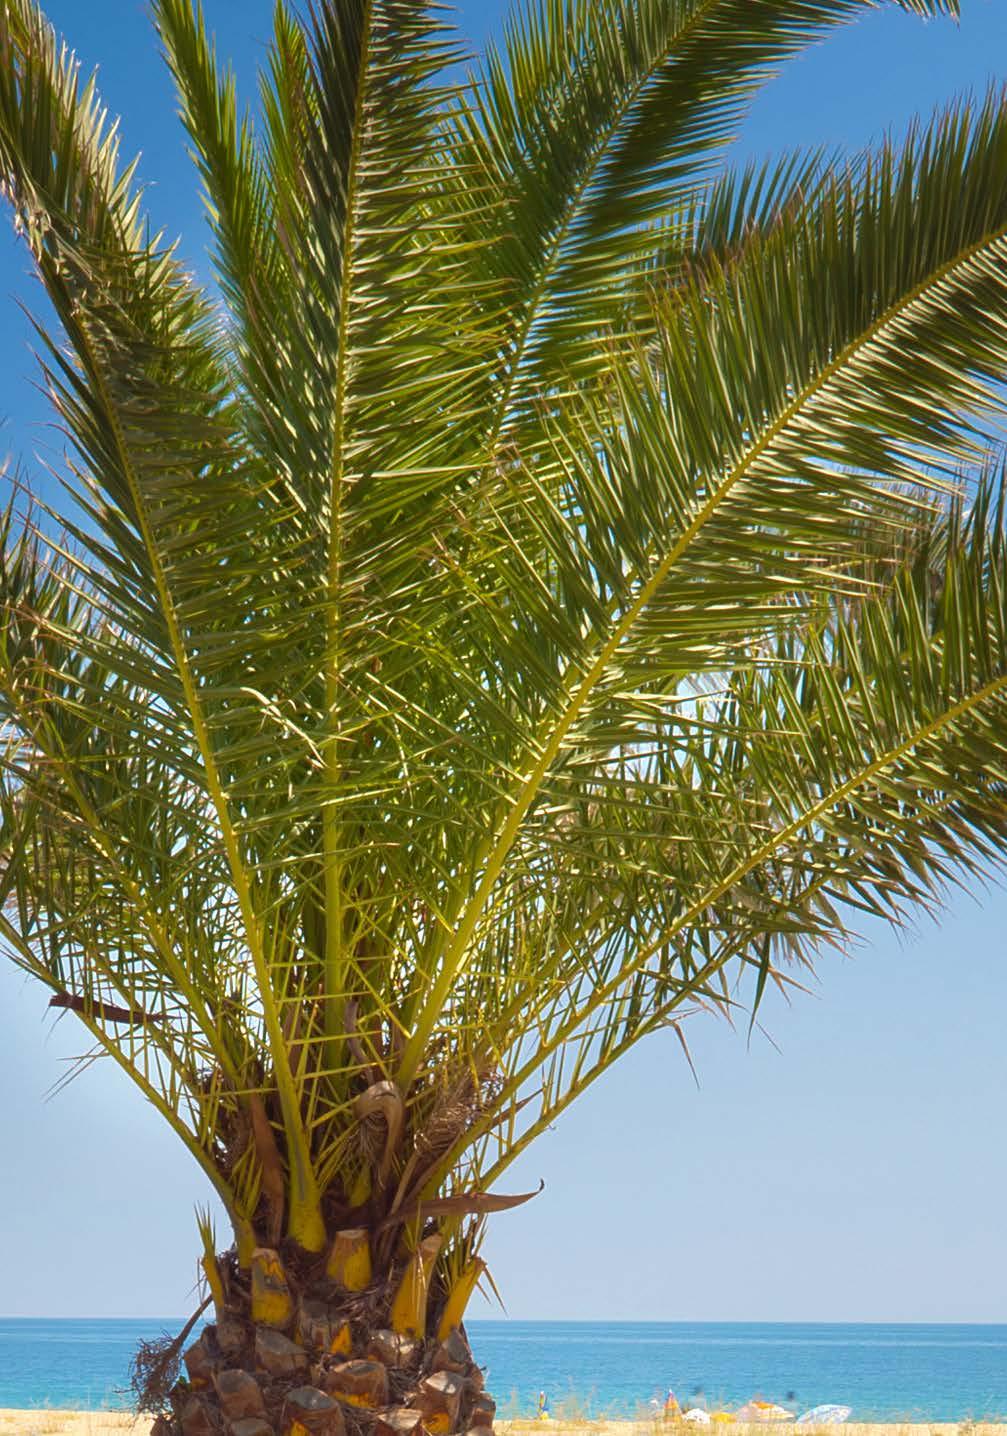 CANARY ISLAND DATE PALMS Date Palms are supplied between 2 and 4 years old.